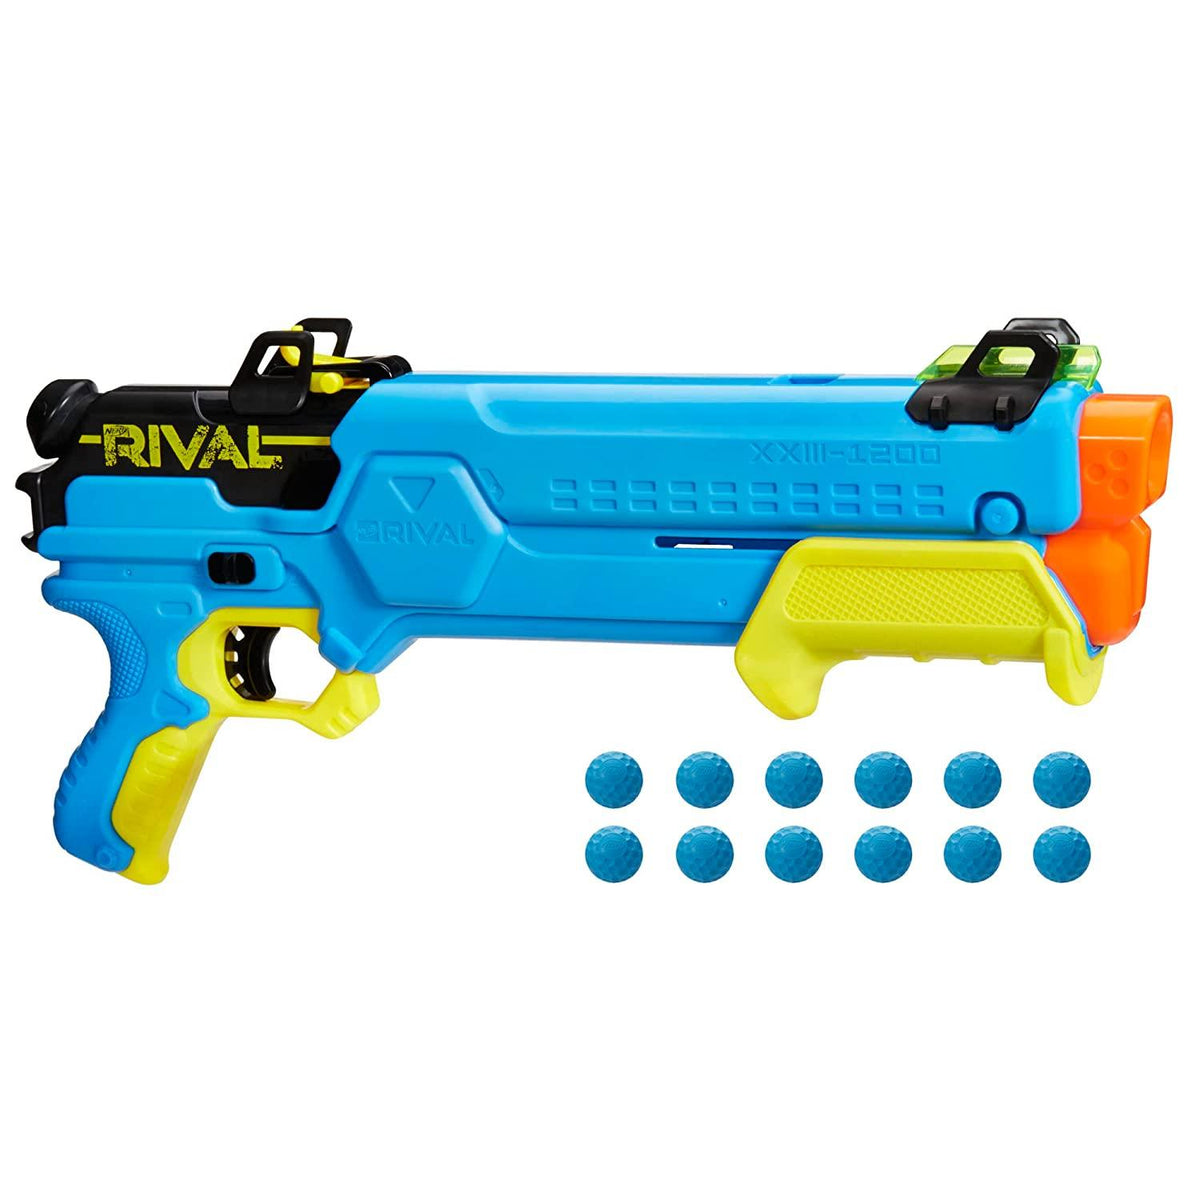 Nerf Rival Forerunner XXIII-1200 Blaster, 12 Round Capacity, 12 Nerf Rival Accu-Rounds, Most Accurate Nerf Rival System, Adjustable Sight - FunCorp India